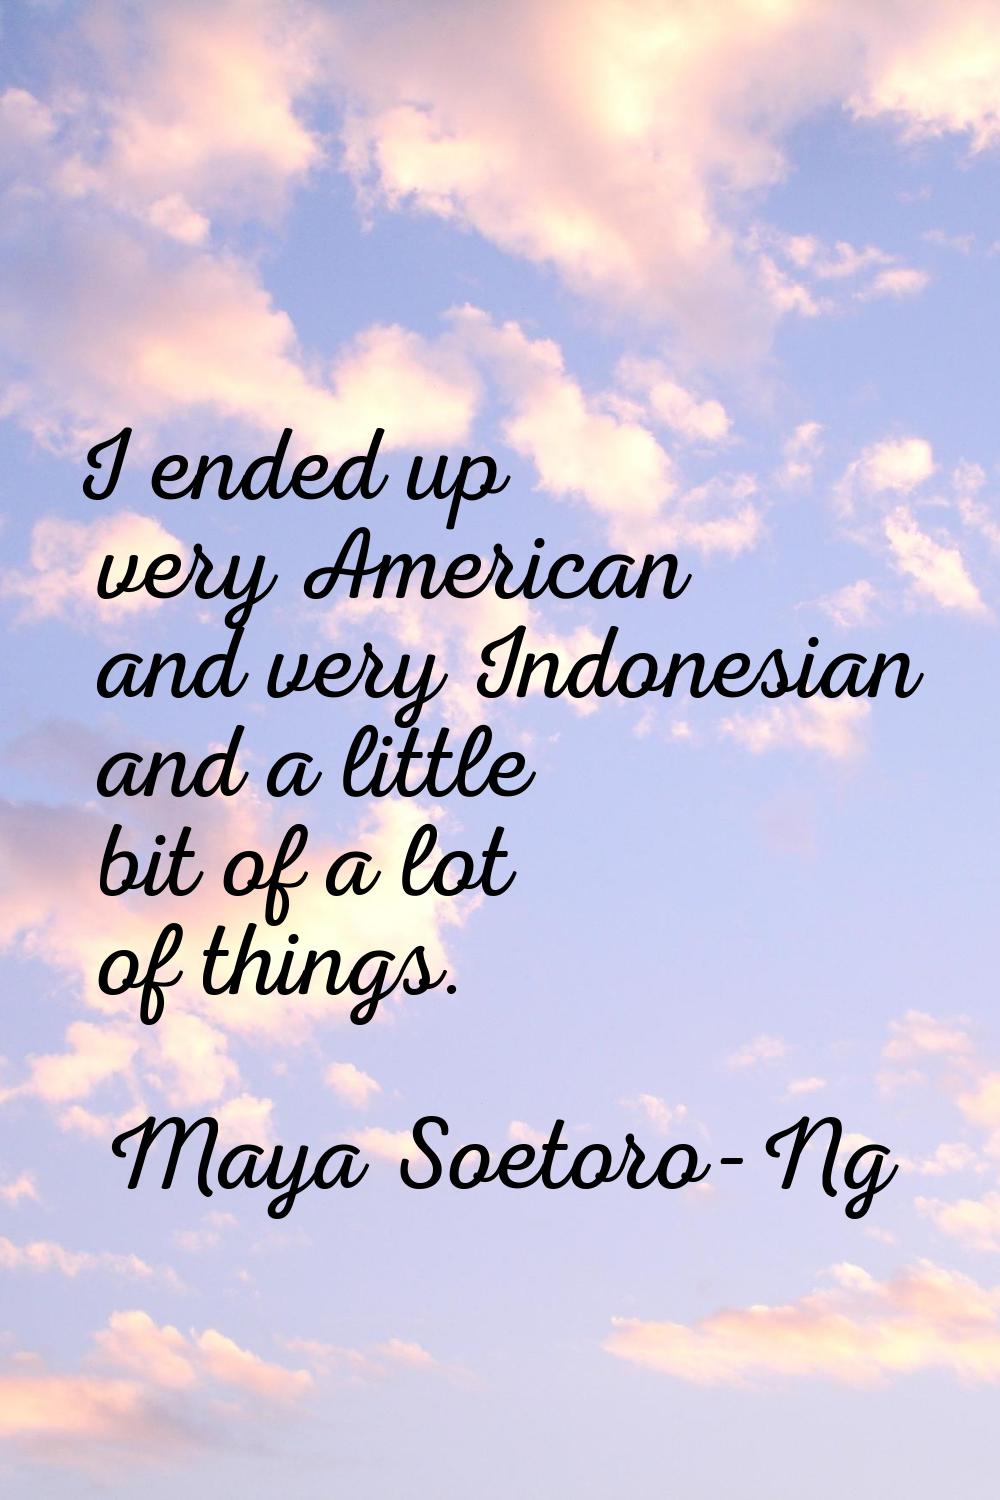 I ended up very American and very Indonesian and a little bit of a lot of things.